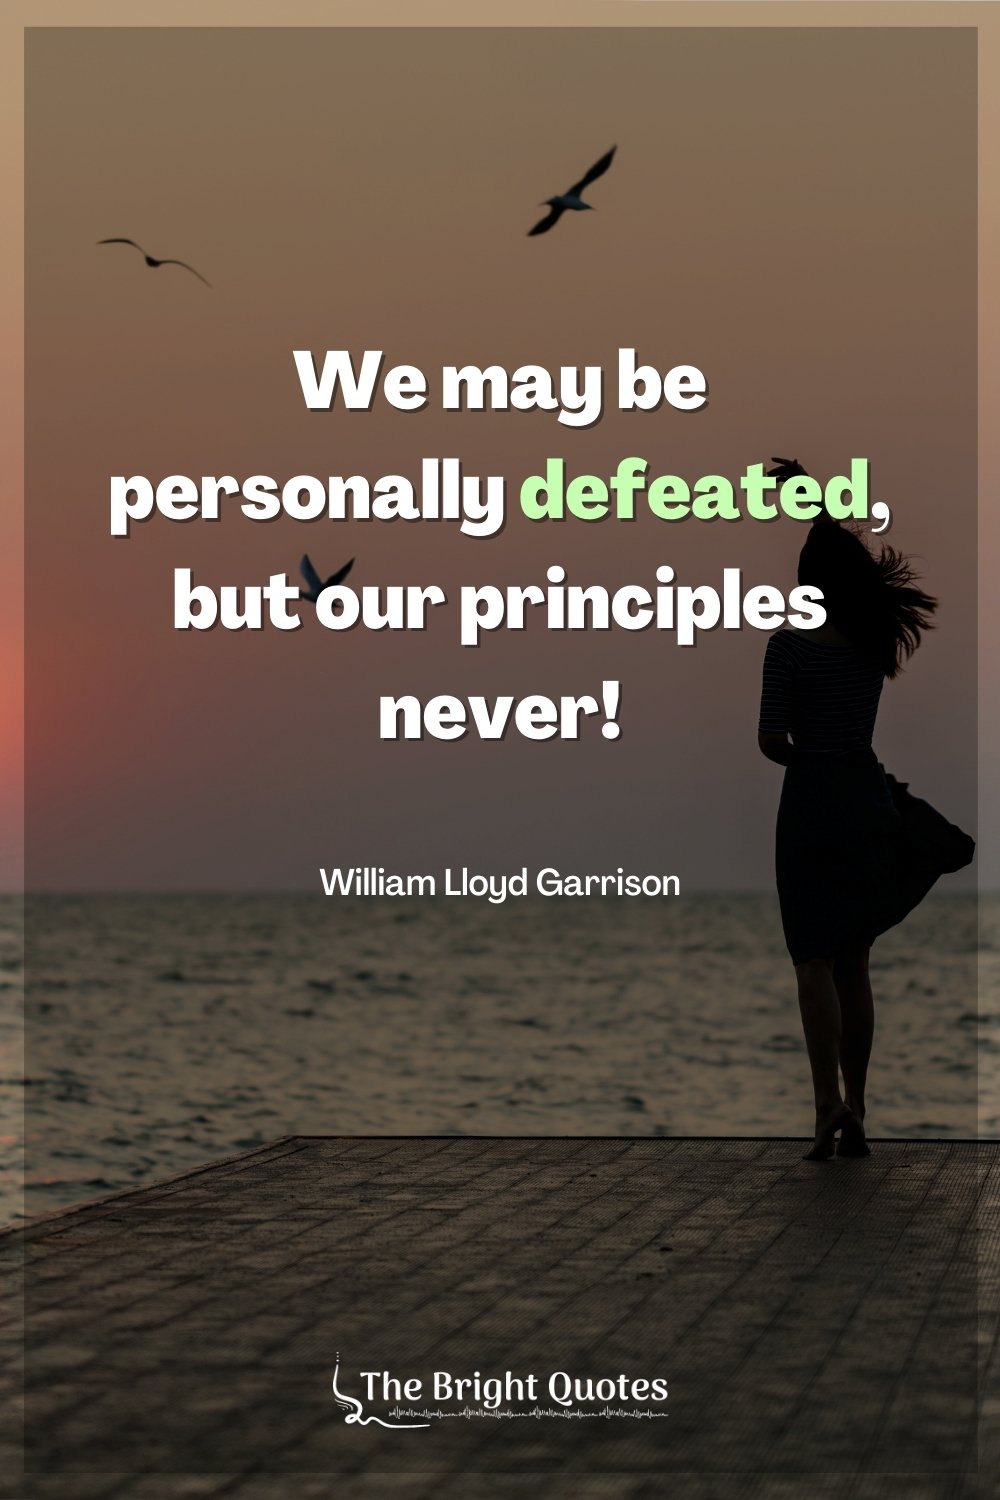 110 Quotes About Defeat for Failure, War and Death - The Bright Quotes